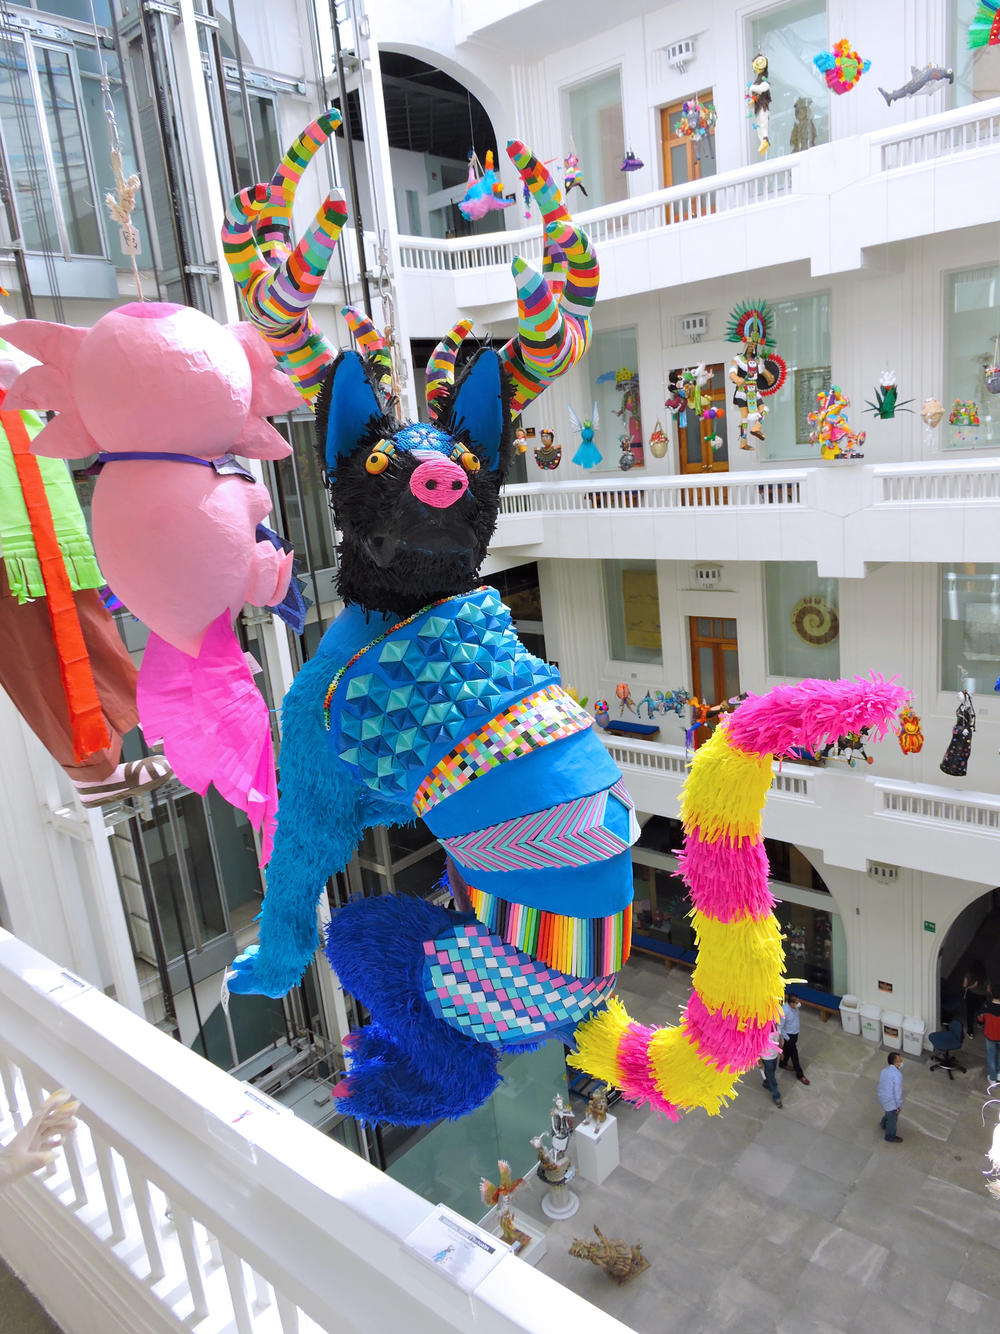 The pinata 'Alebrijes, Tonas y Nahuales' won first place in the pinata contest organized by the Museum of Popular Art in Mexico. By René Bautista Lemus.